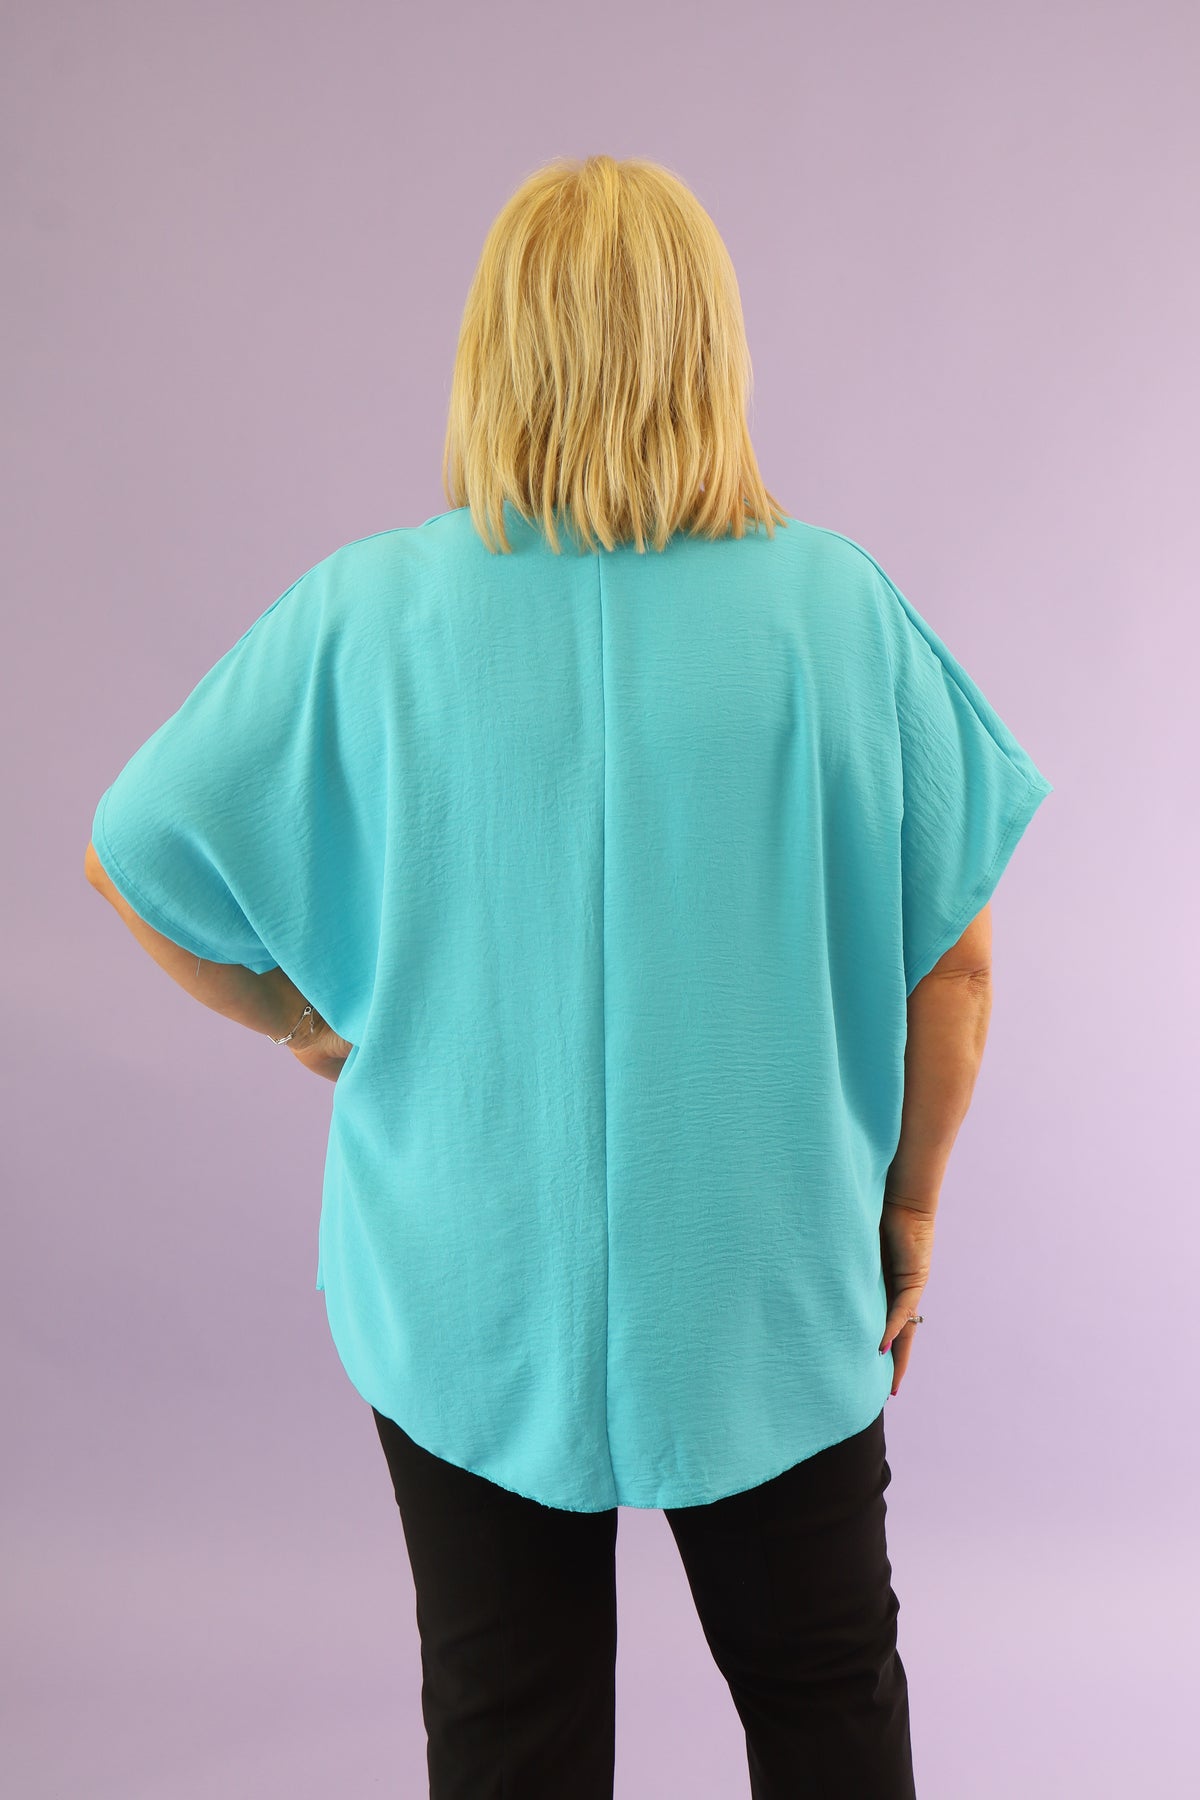 Ellie Blouse in Turquoise